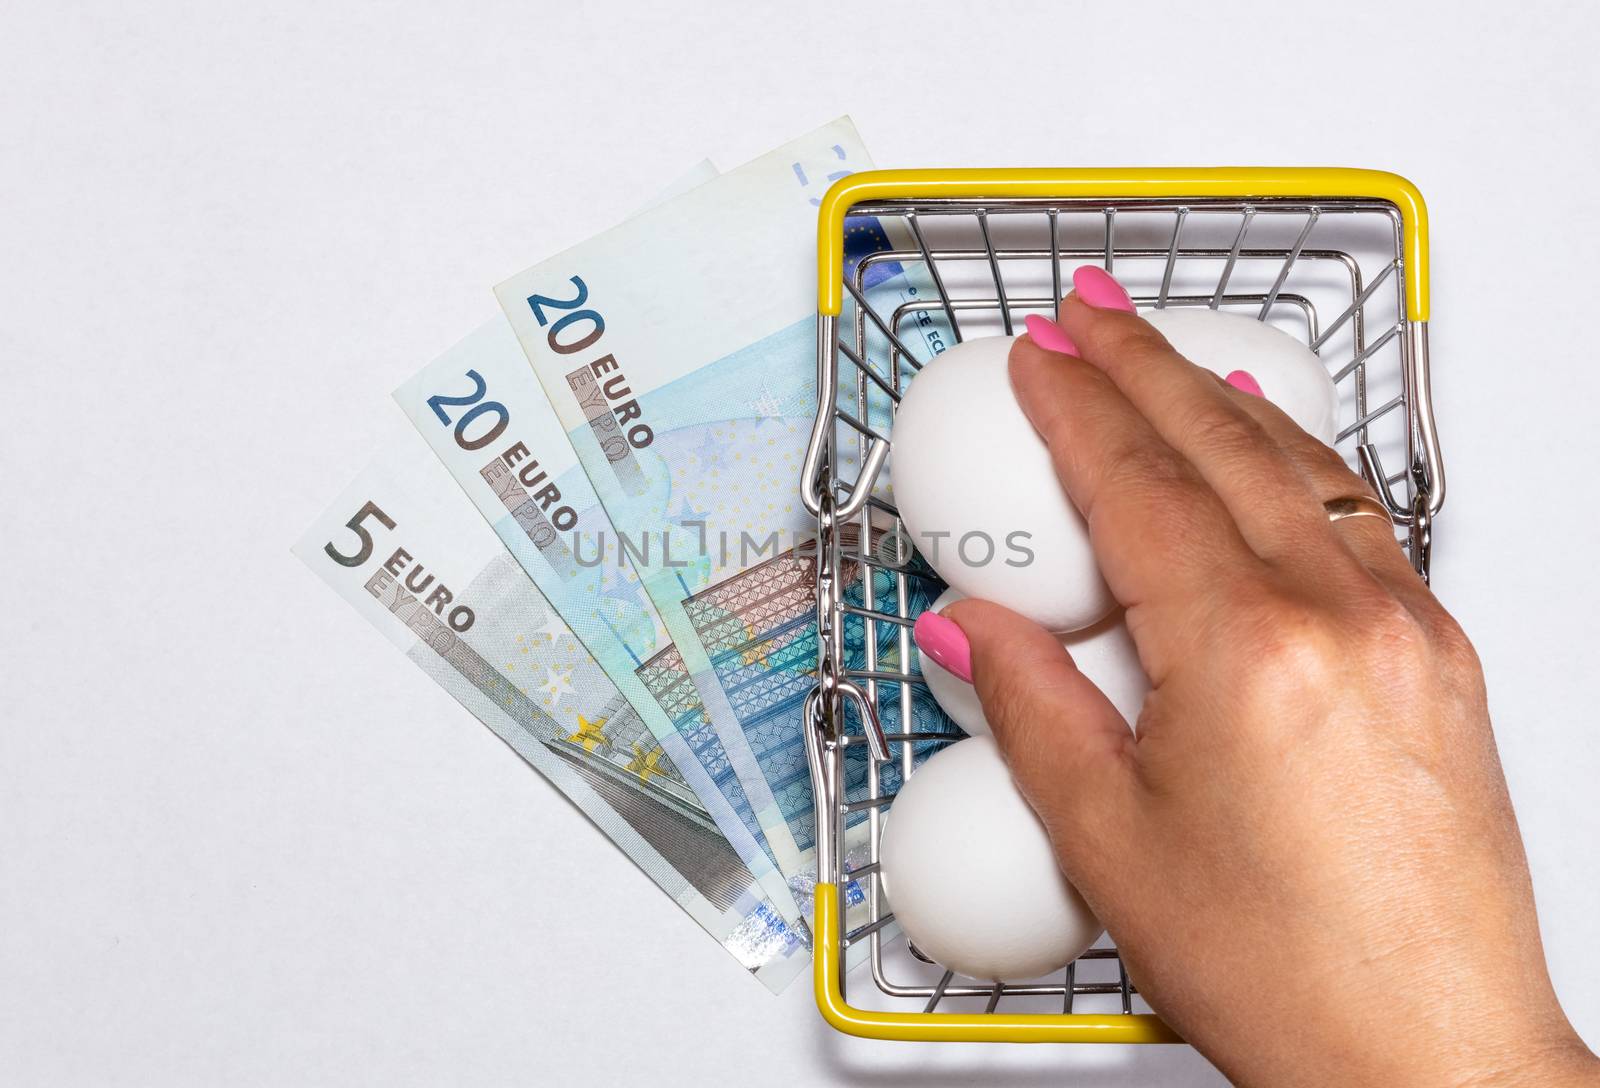 Fresh eggs in a shopping cart with various euro bills underneath it and womans hand reaching for eggs. Shopping, purchasing, and food delivery concept. White background. Close up shot. Isolated.